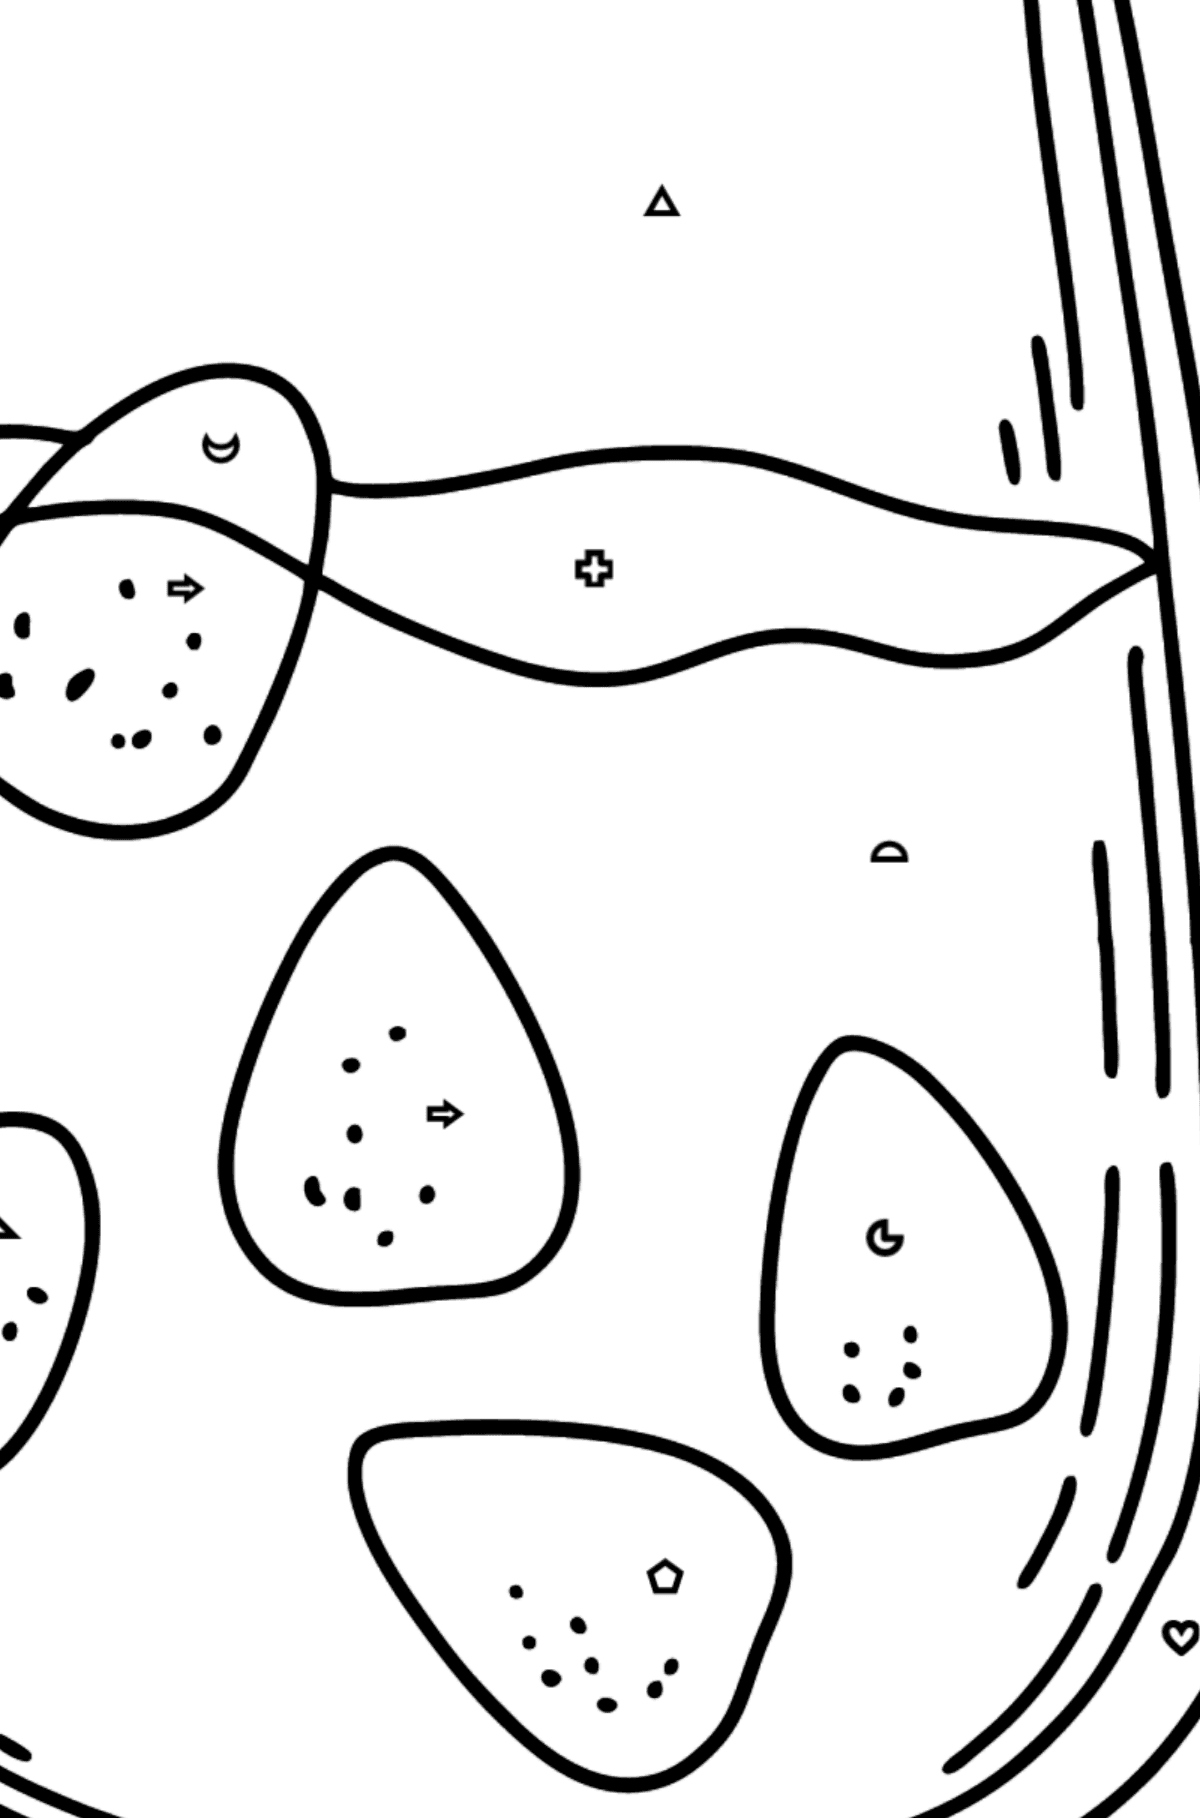 Milk with Berries coloring page - Coloring by Geometric Shapes for Kids